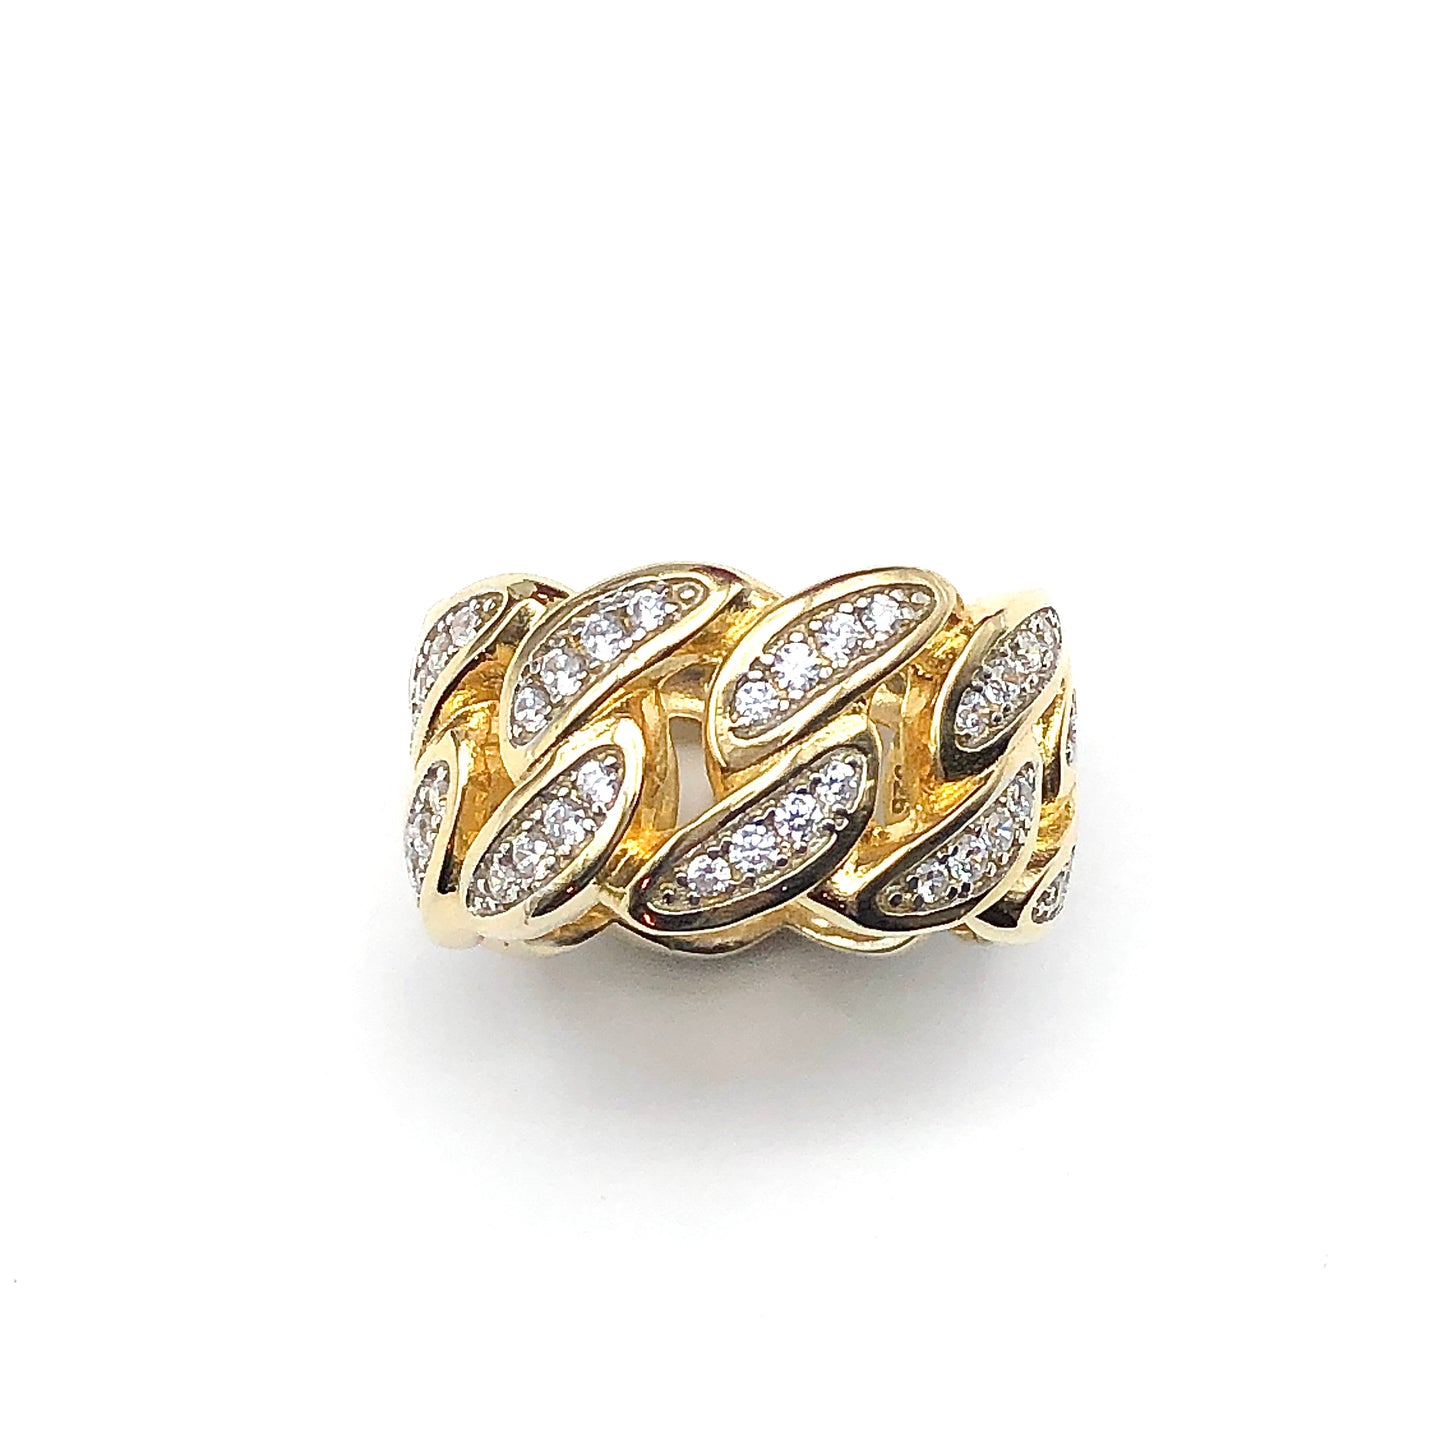 Ring Iced Out | sz9.5 Shimmery Cz Sterling Gold Curb Chain Ring | Wide Band